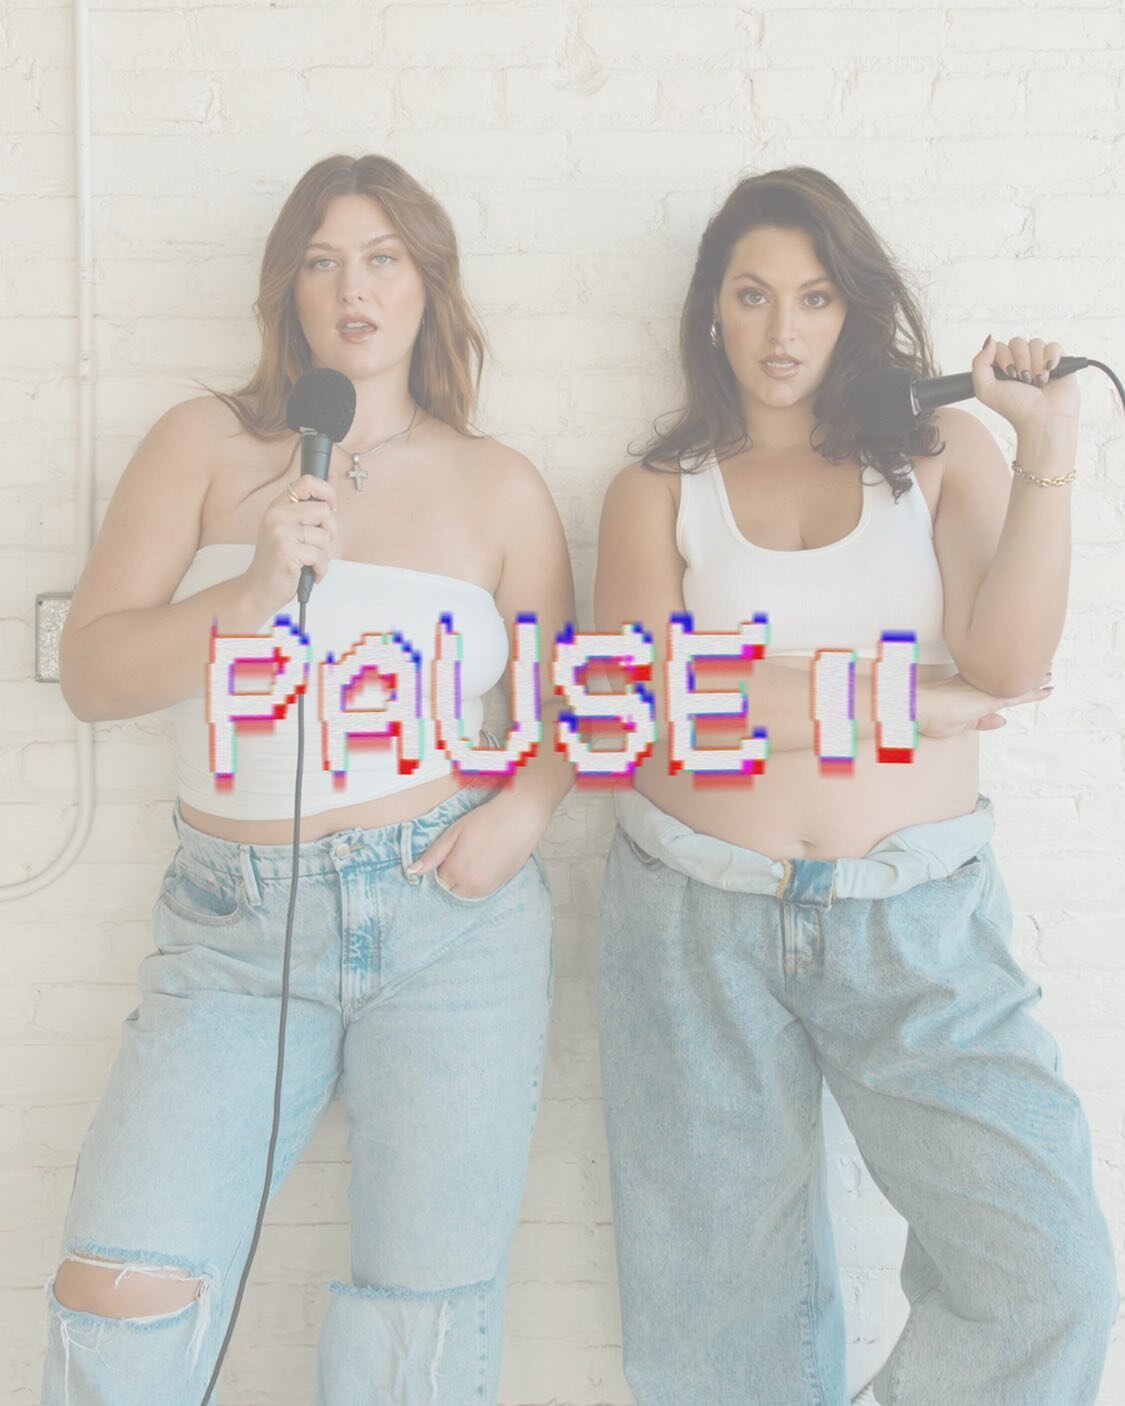 Reminder: we&rsquo;re taking a quick pause with the podcast! While there&rsquo;s no new episode today, we have 120+ episodes for you to revisit. You can also check out these amazing podcasts/hosts we have had on our show:

🎙️ @dateablepodcast 

🎙️ 